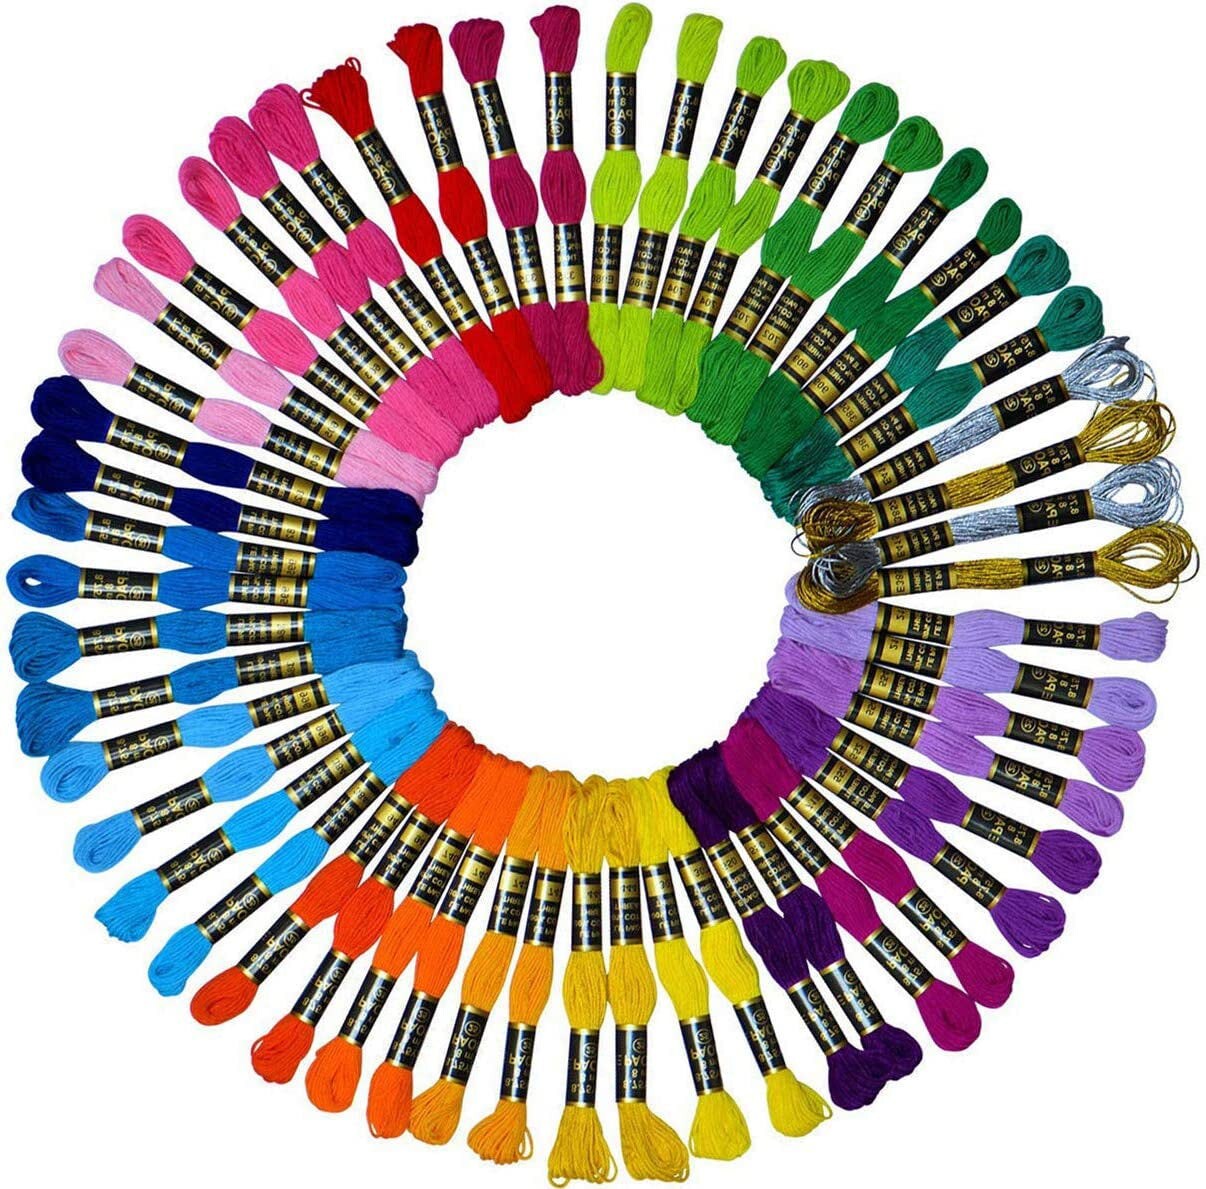 50 Skeins Embroidery Floss Rainbow Color Cross Stitch Threads,diy